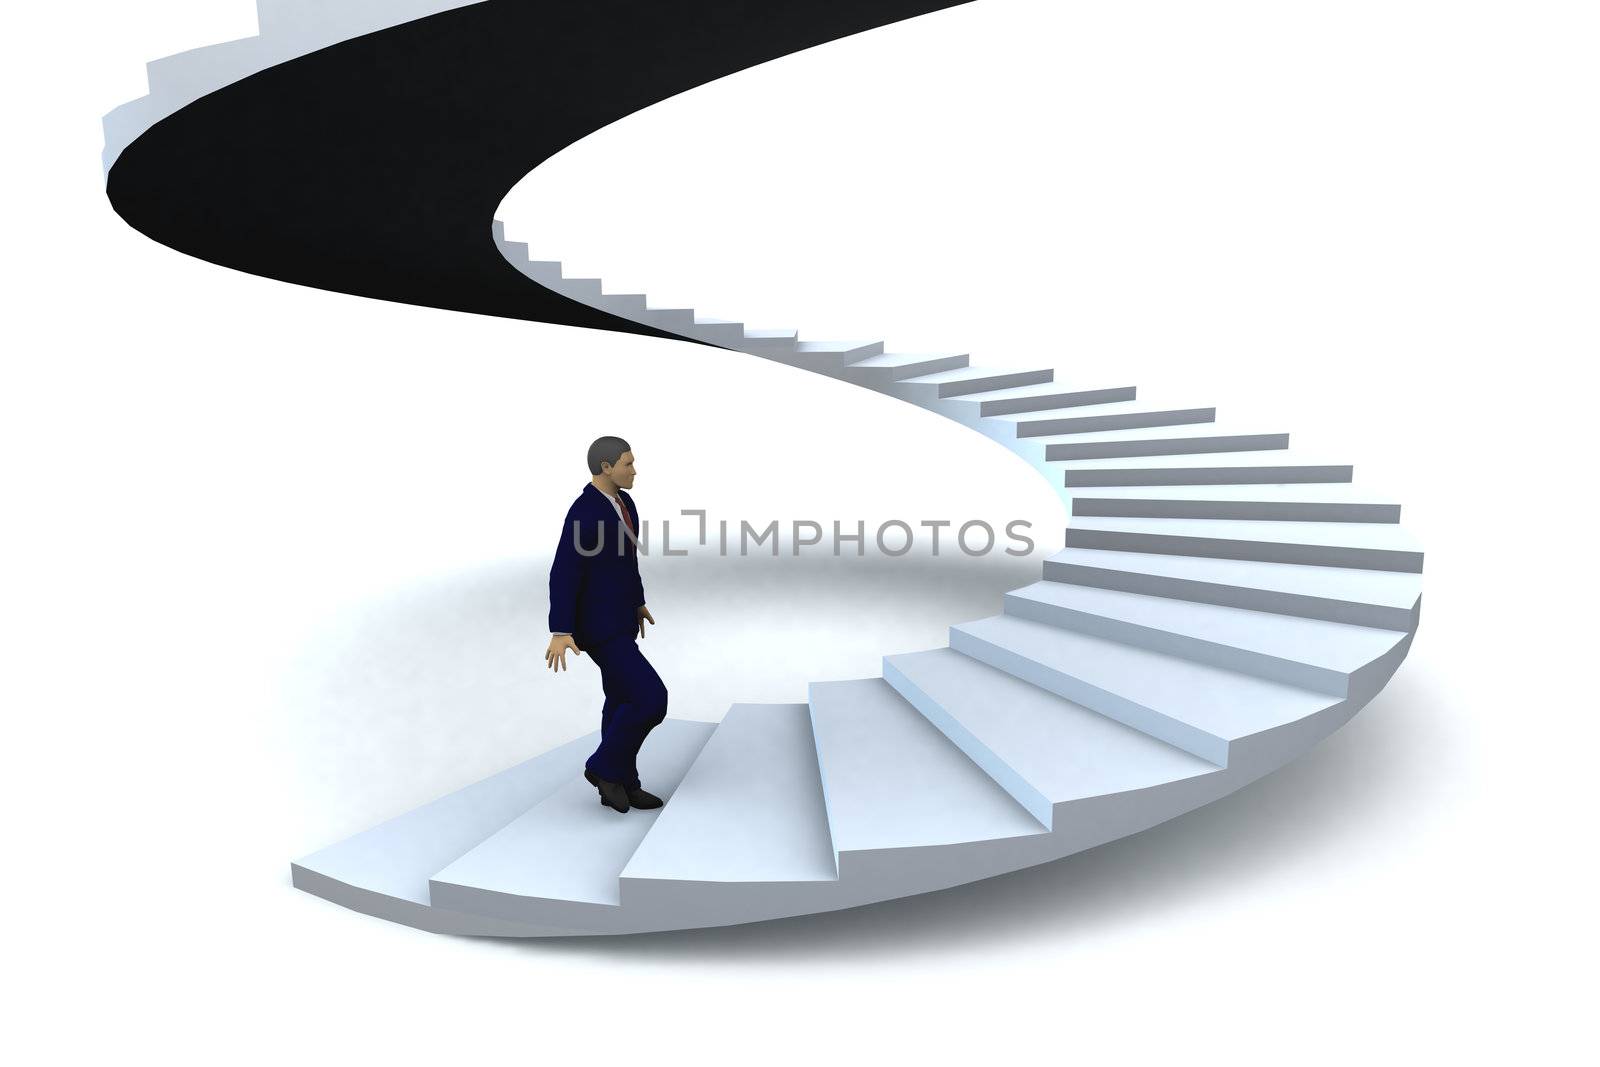 Stairway to success by cienpies